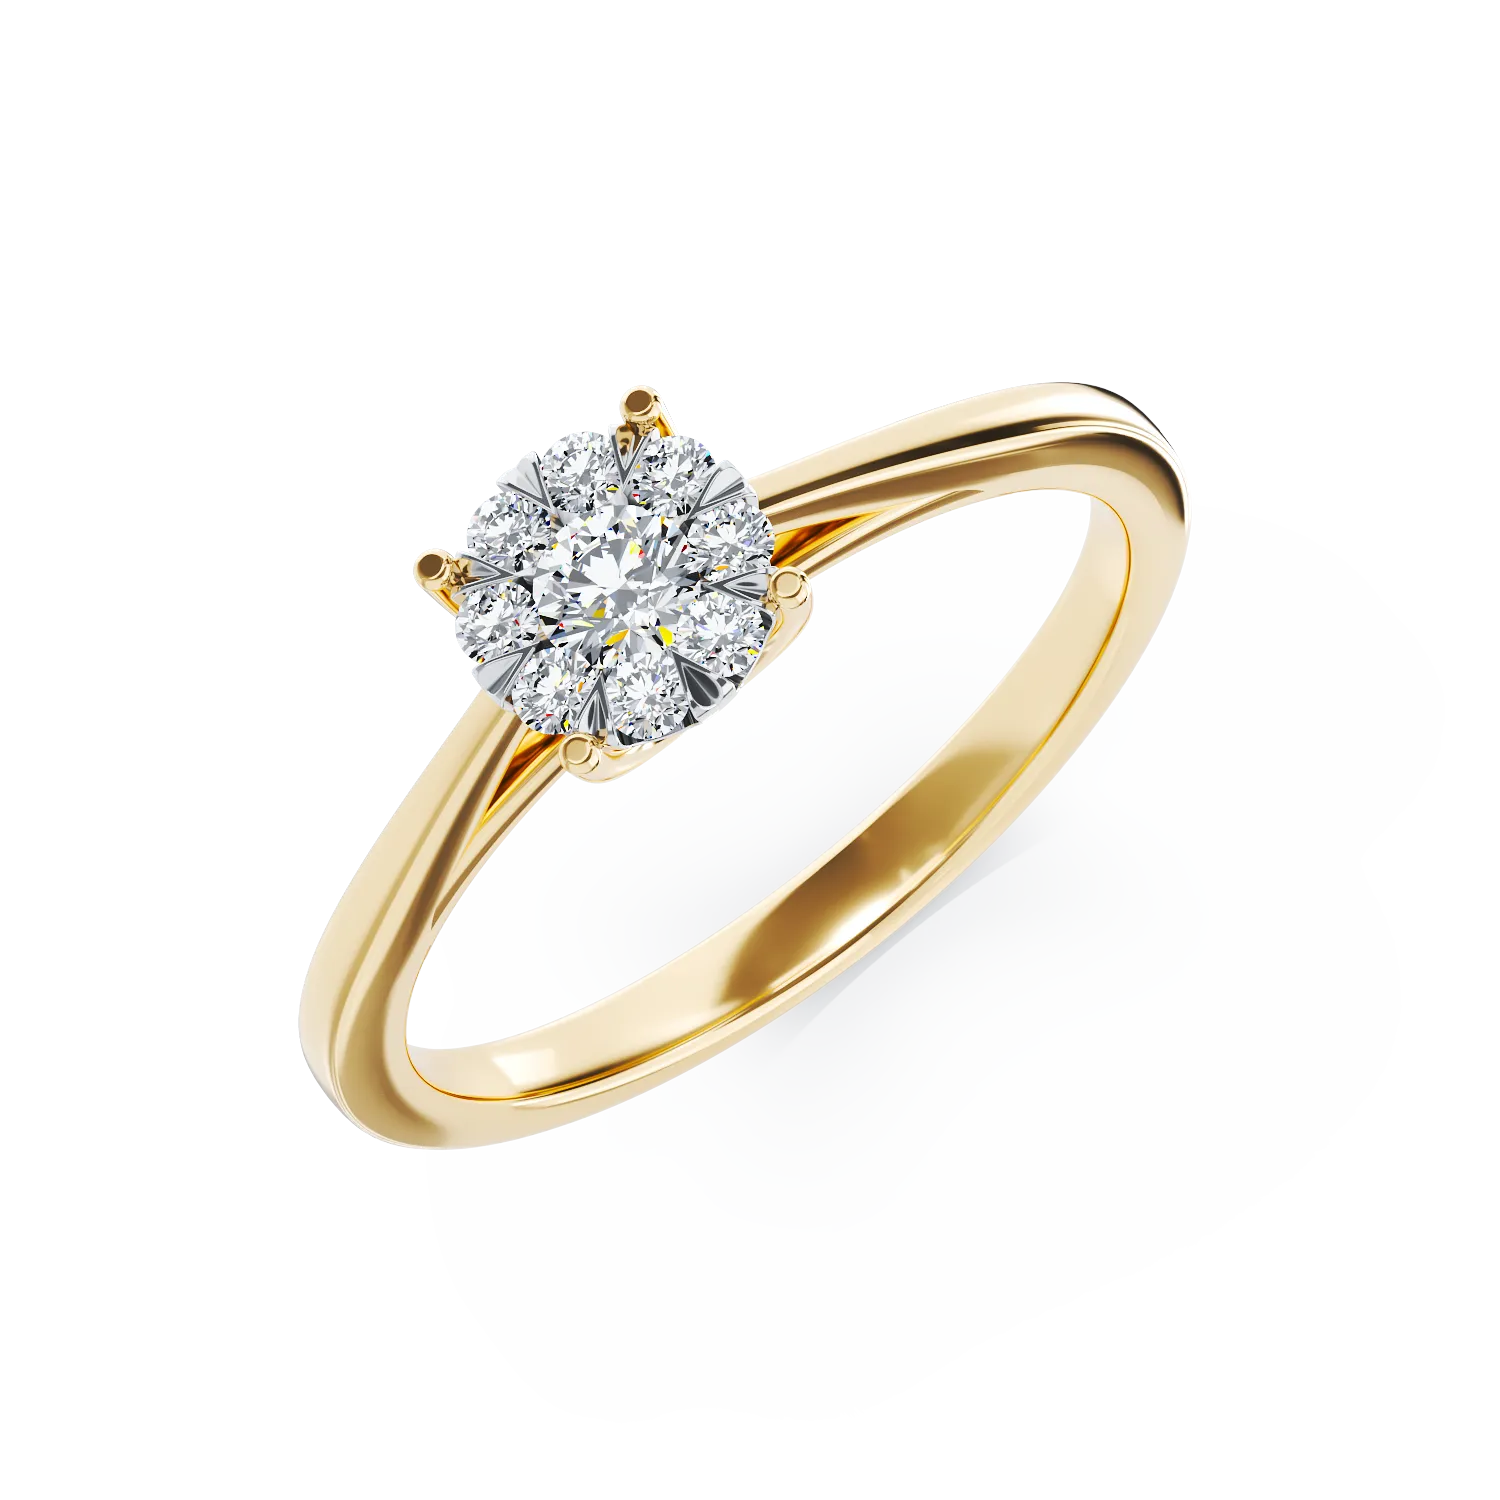 18K yellow gold engagement ring with 0.25ct diamonds